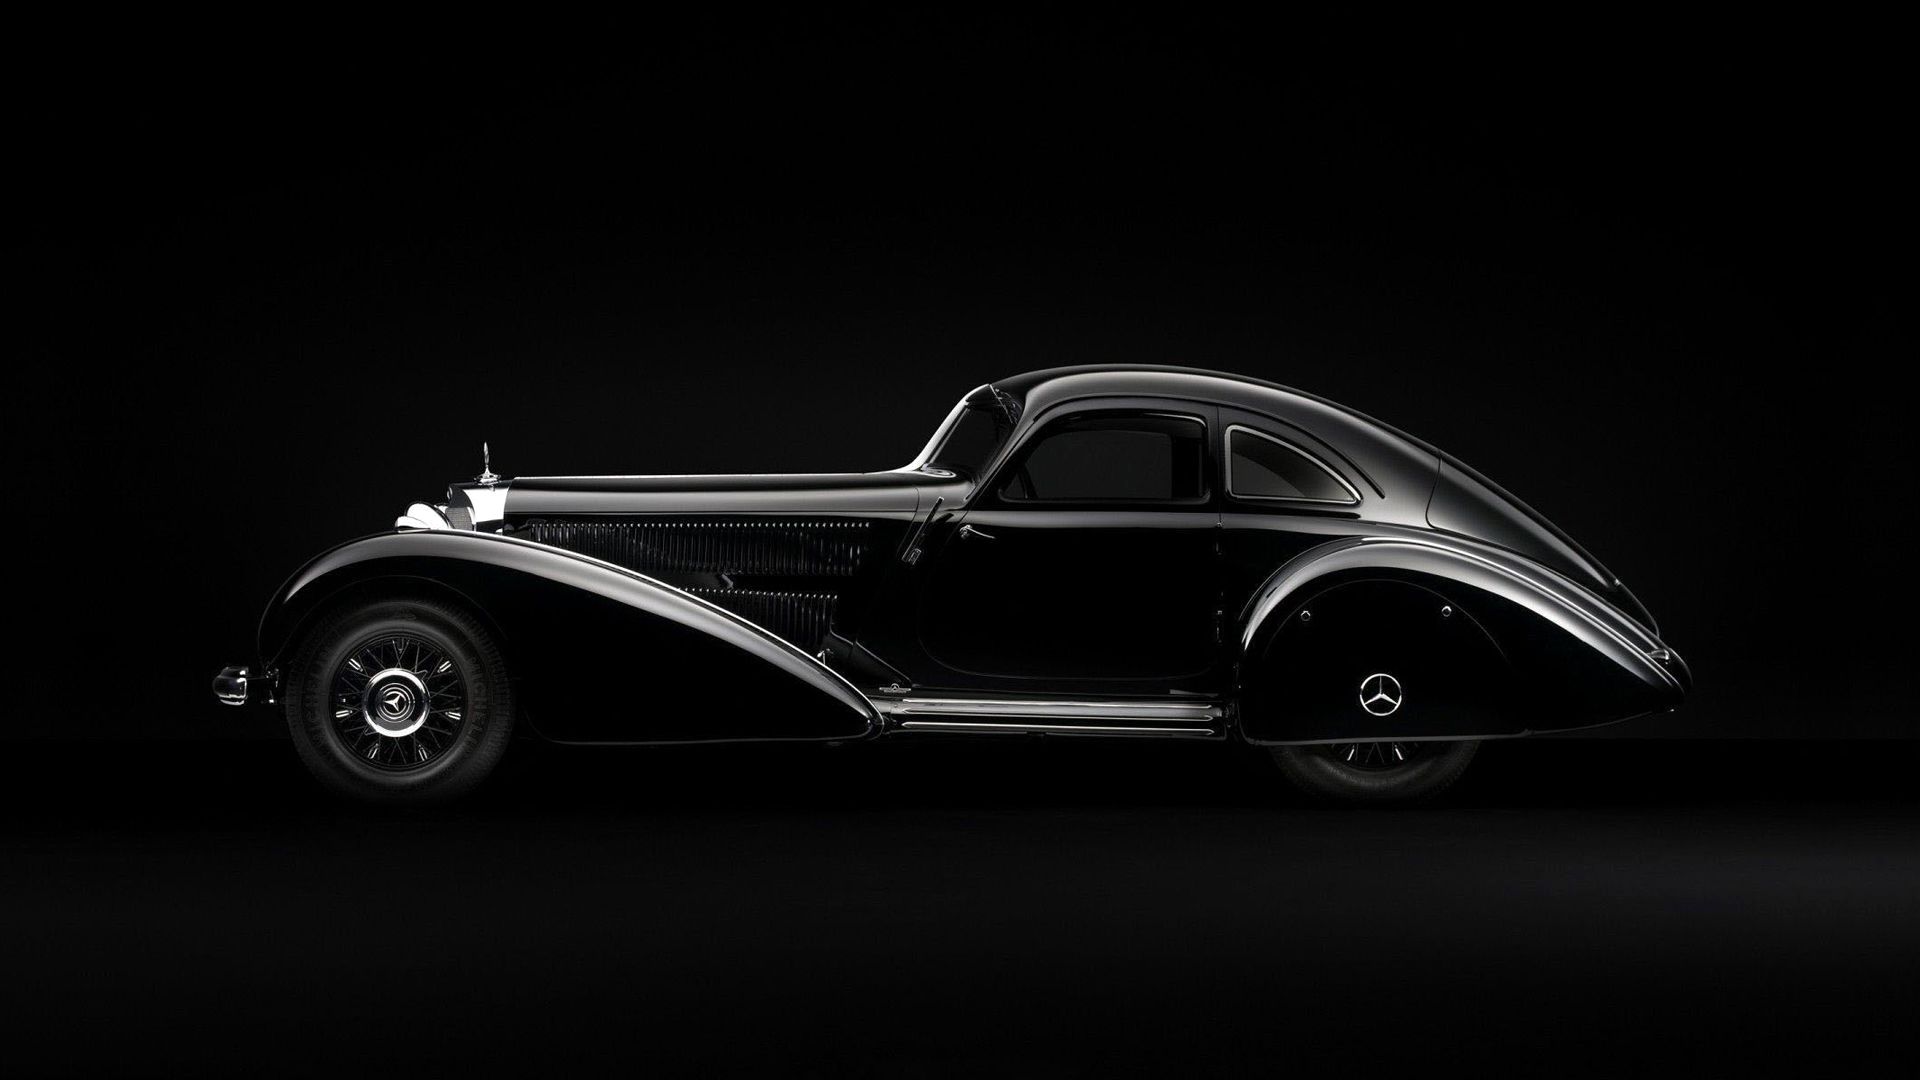 car.photo.collections.for.you: Black Classic Car Wallpapers 13 ...